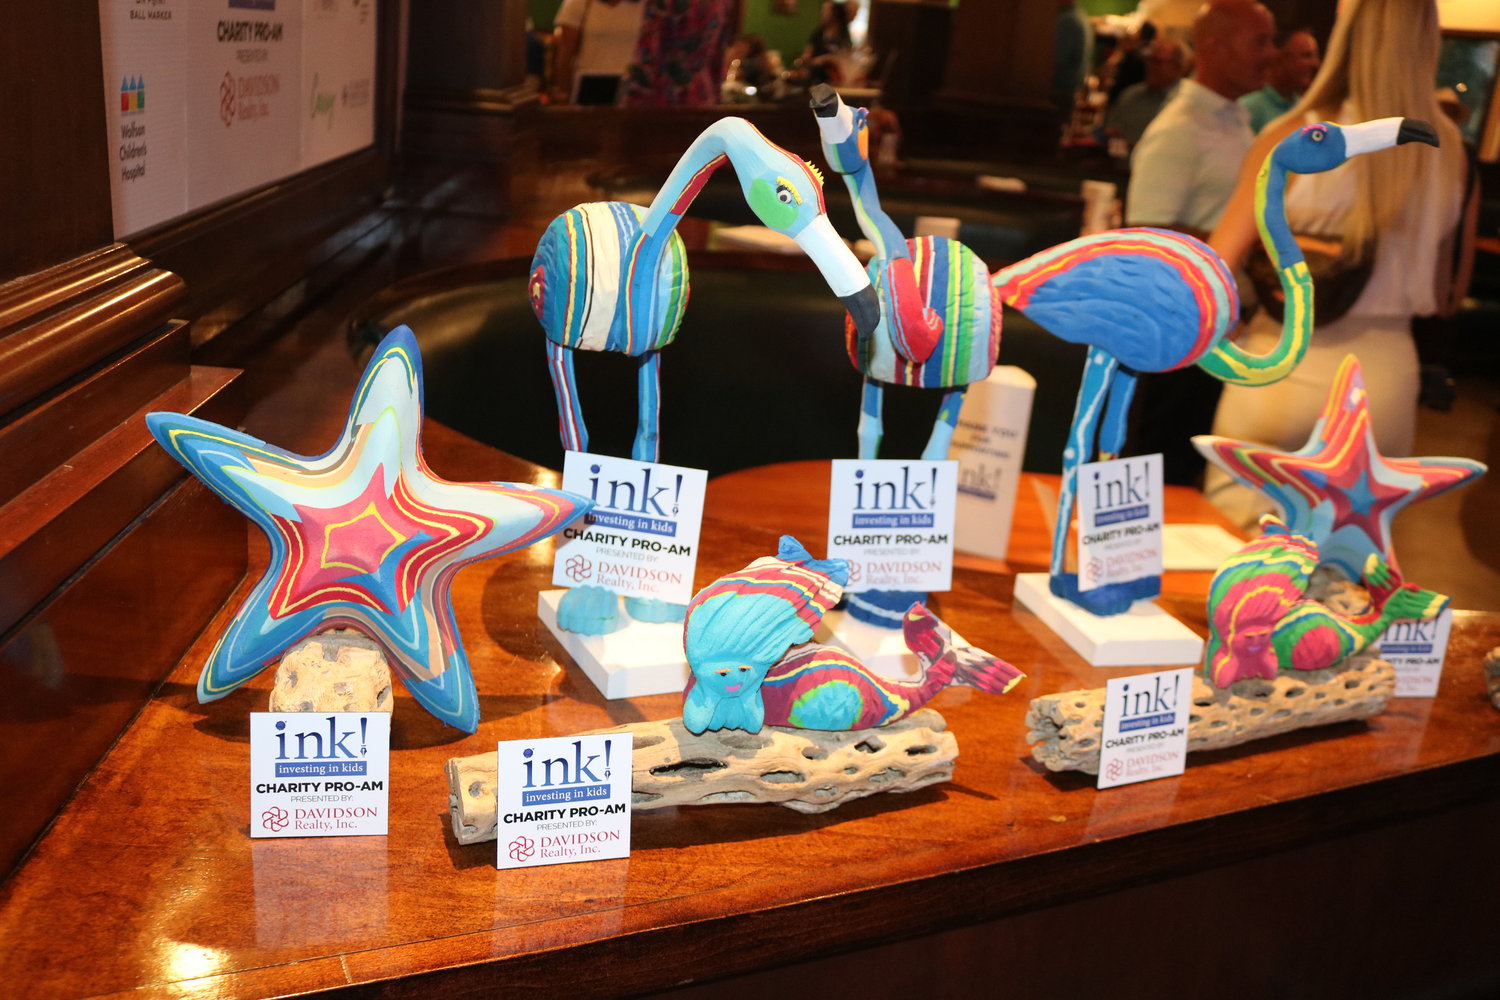 Sculptures made by Ocean Sole out of recycled flip-flops welcomed guests as they walked into the event.